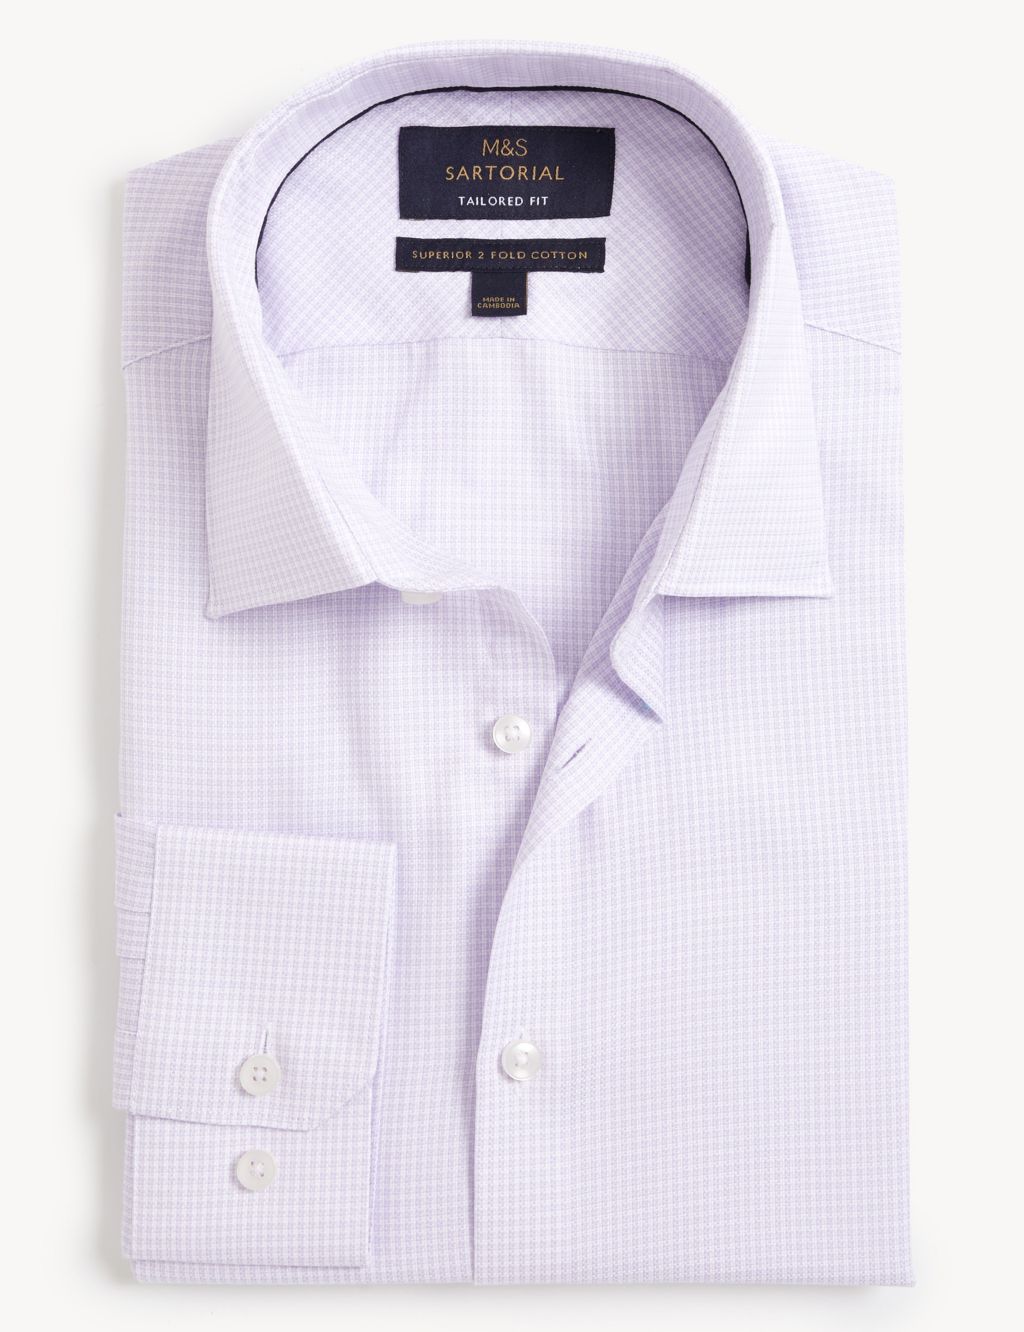 Tailored Fit Pure Cotton Puppytooth Shirt image 2